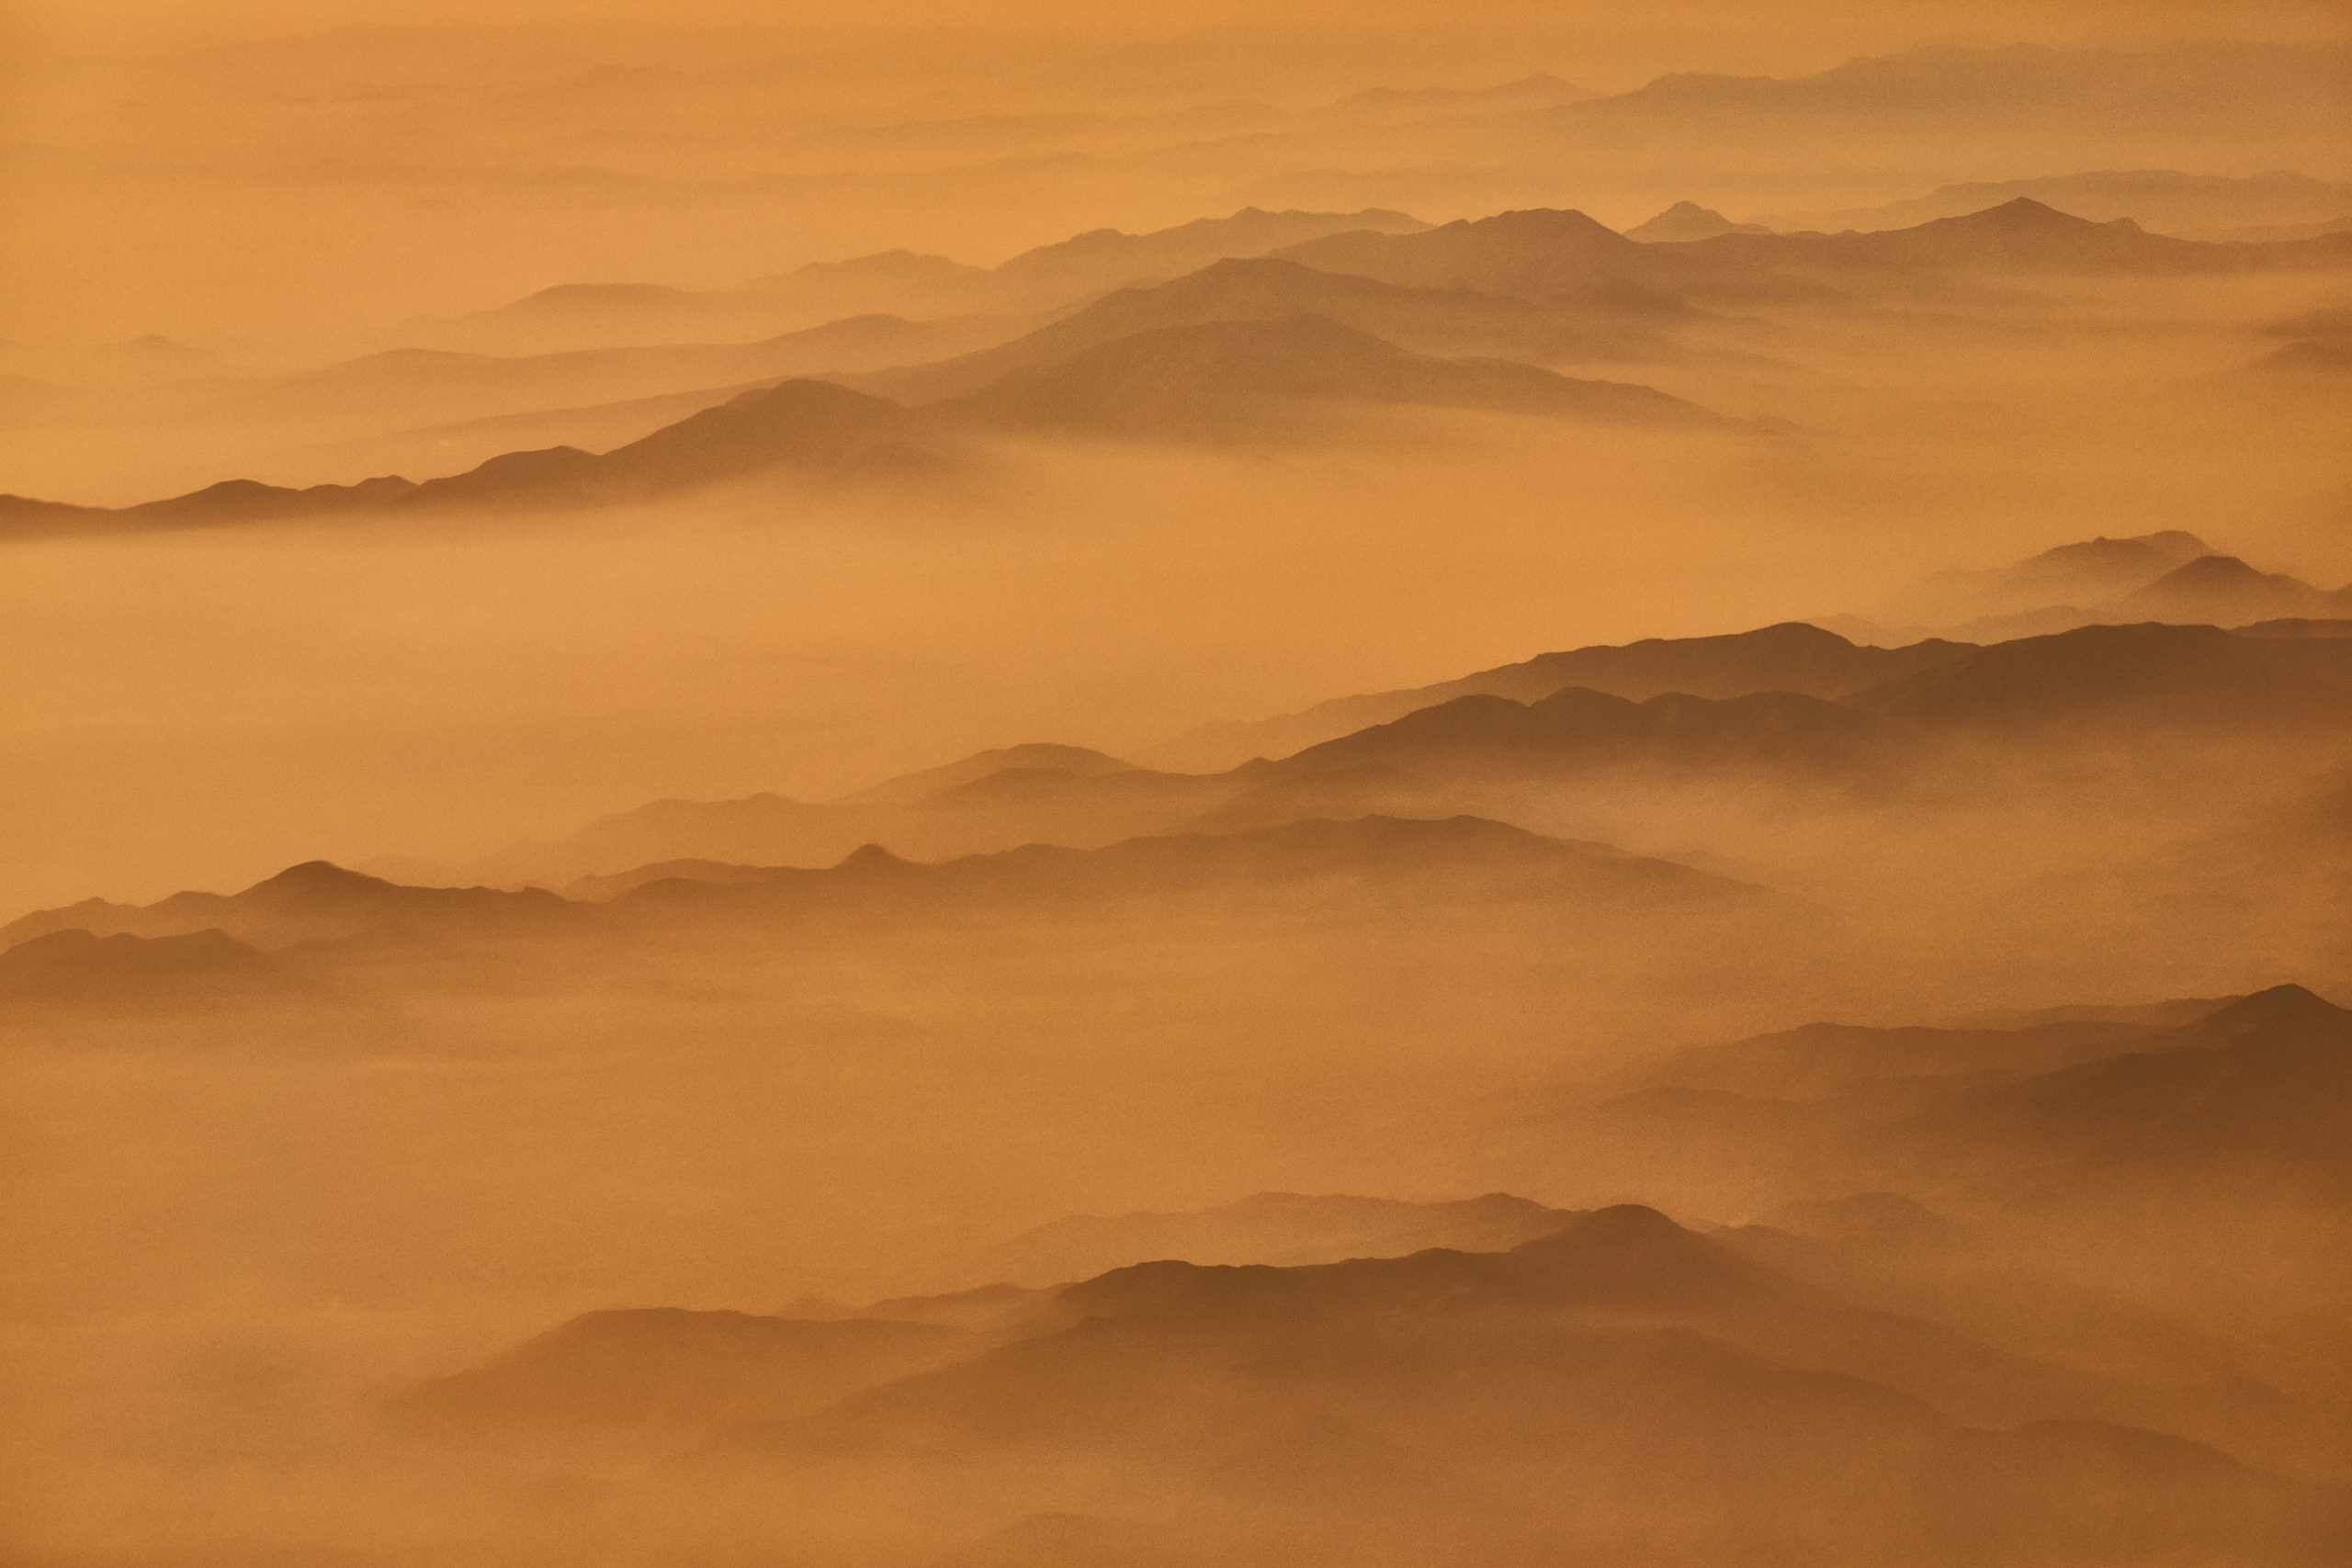 The Andes fading into misty sunset